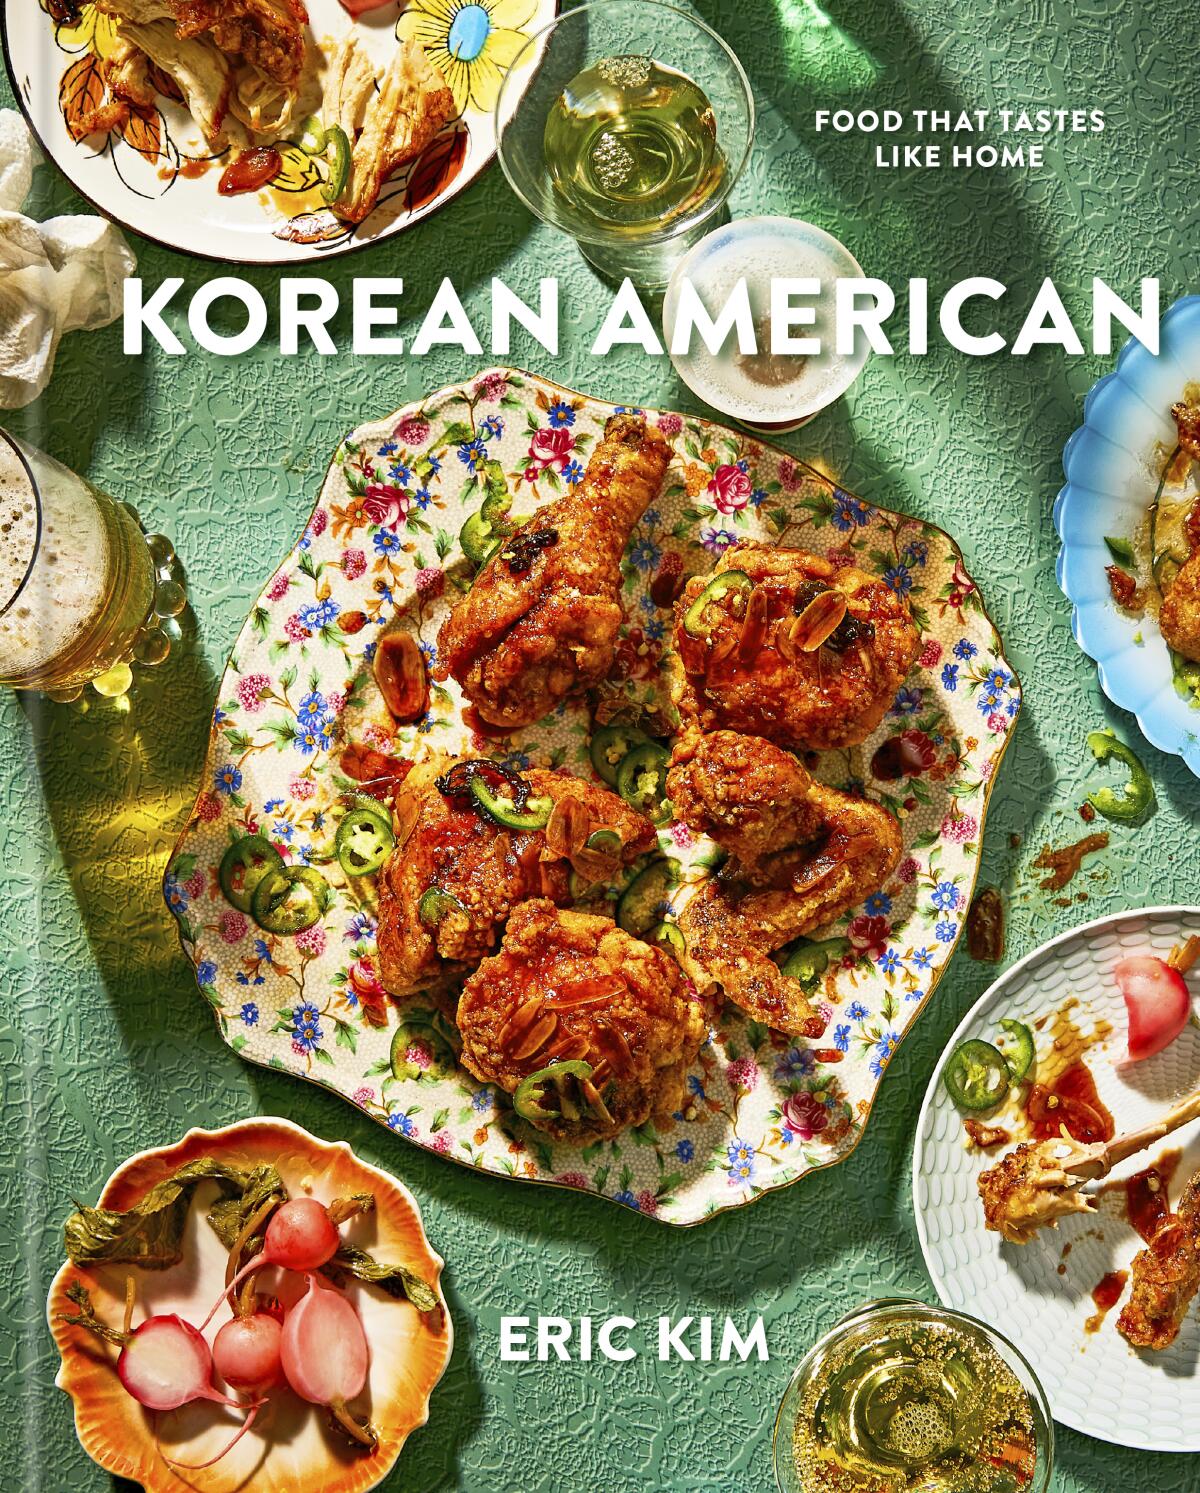 The cover of 'Korean American' by Eric Kim.